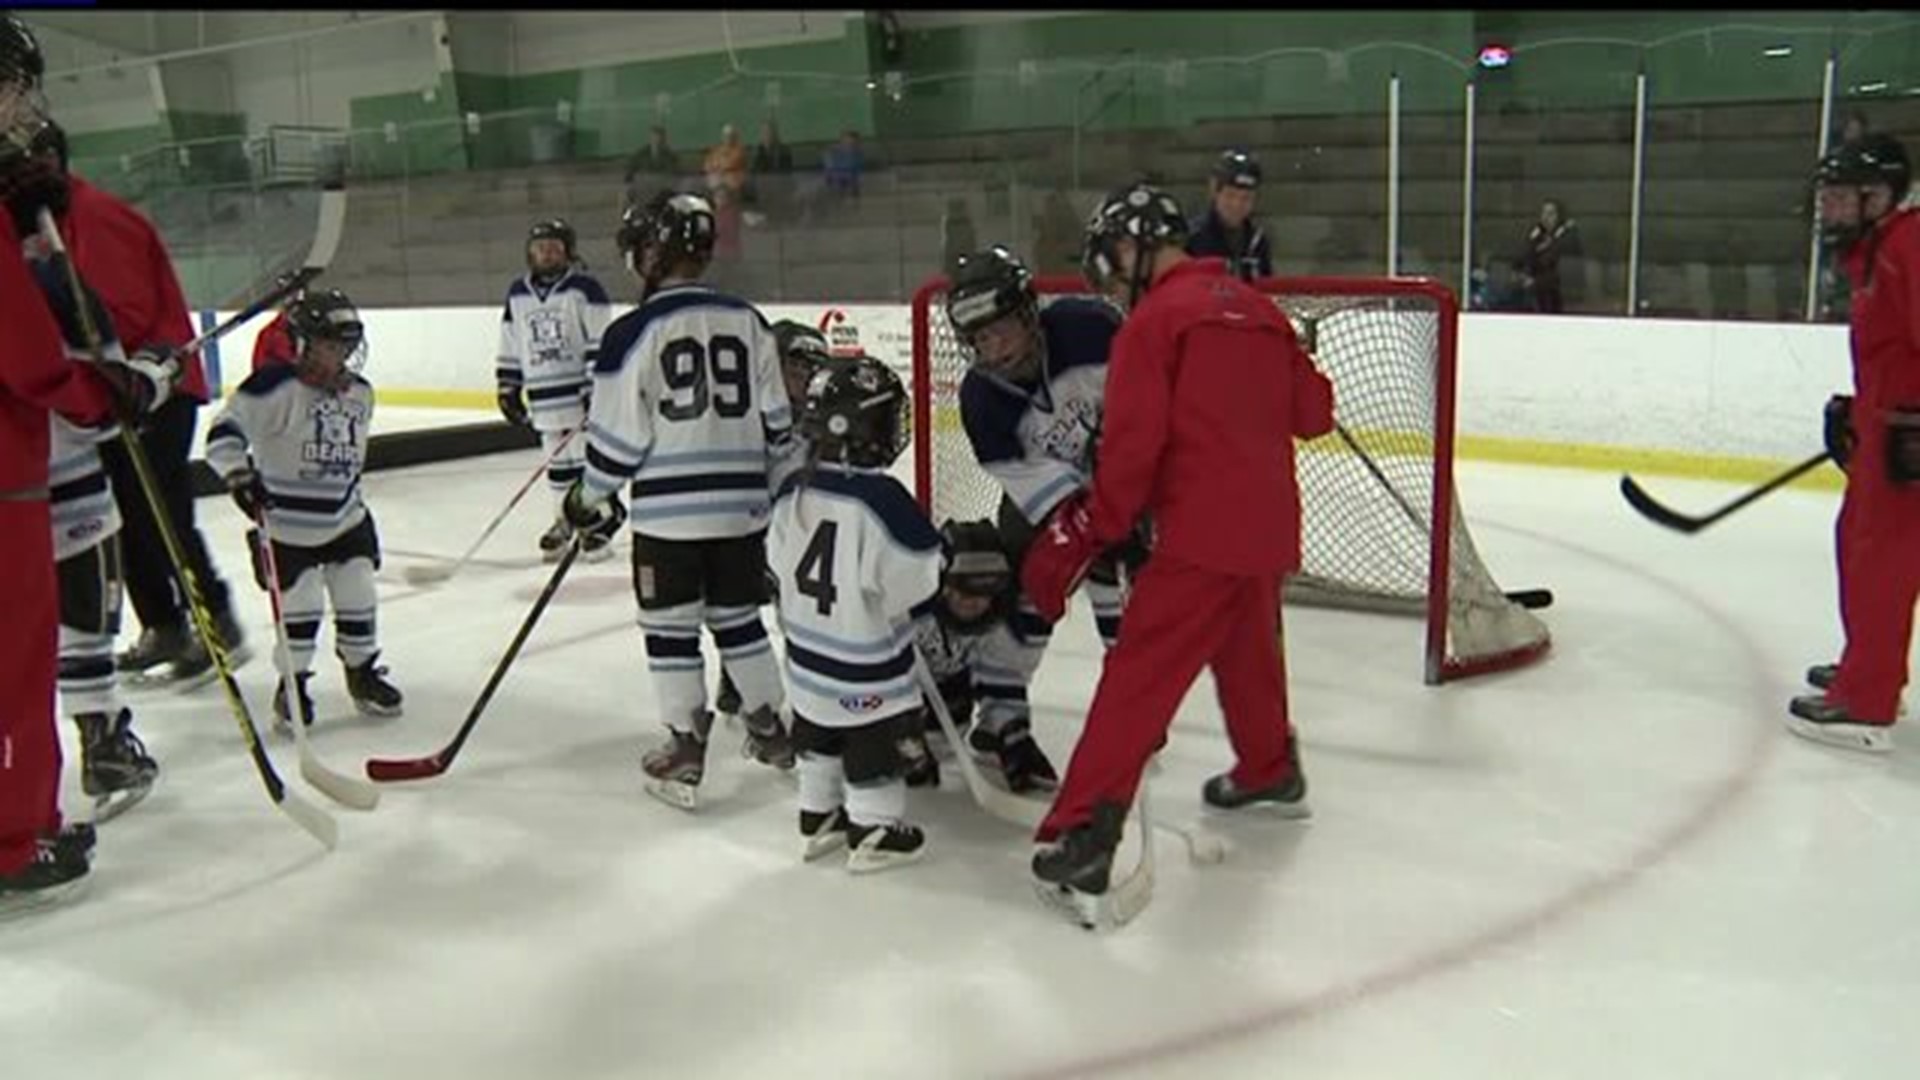 "She`s accepted and loved," mom describes hockey team for special needs children